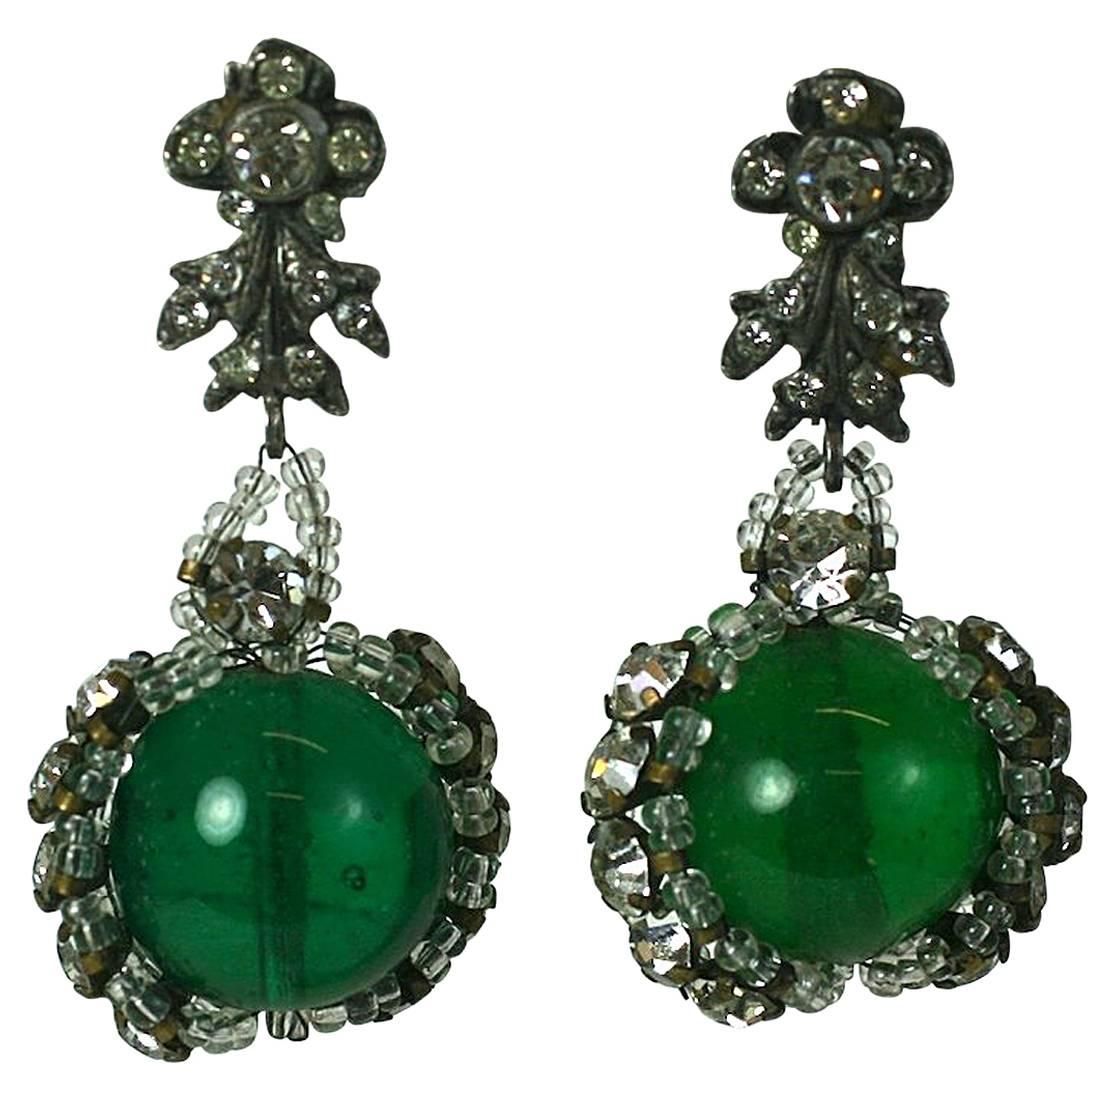 Rousselet Emerald Pate de Verre and Embroidered Earrings For Sale